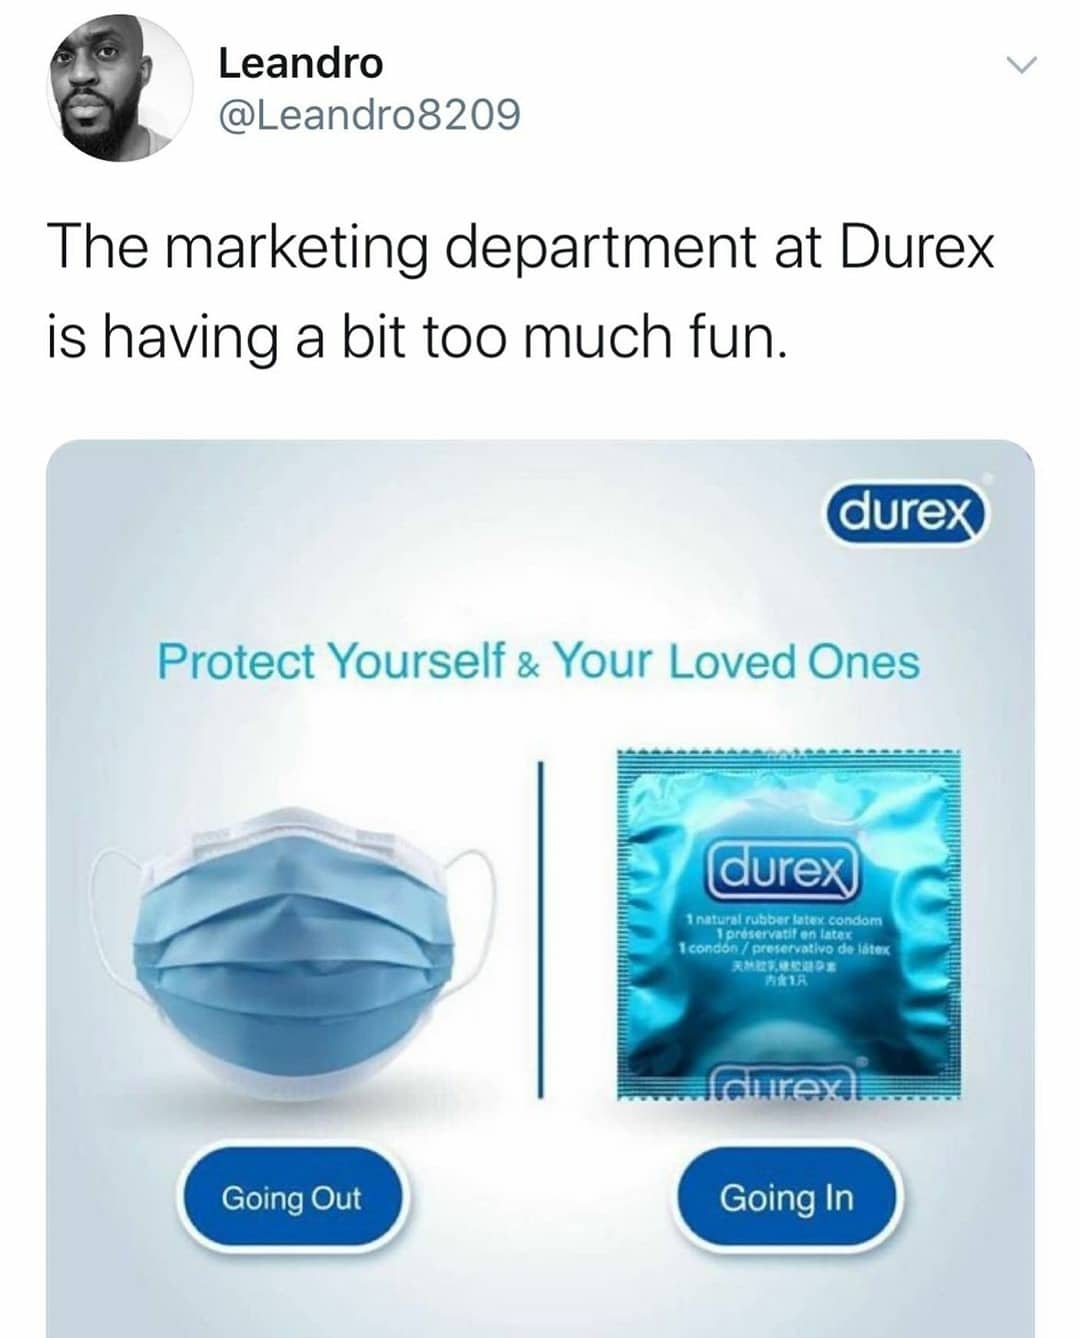 Tweets, PPE, HIV, Durex Black Twitter Memes Tweets, PPE, HIV, Durex text: Leandro @Leandr08209 The marketing department at Durex is having a bit too much fun. dure Protect Yourself & Your Loved Ones Going Out Going In 